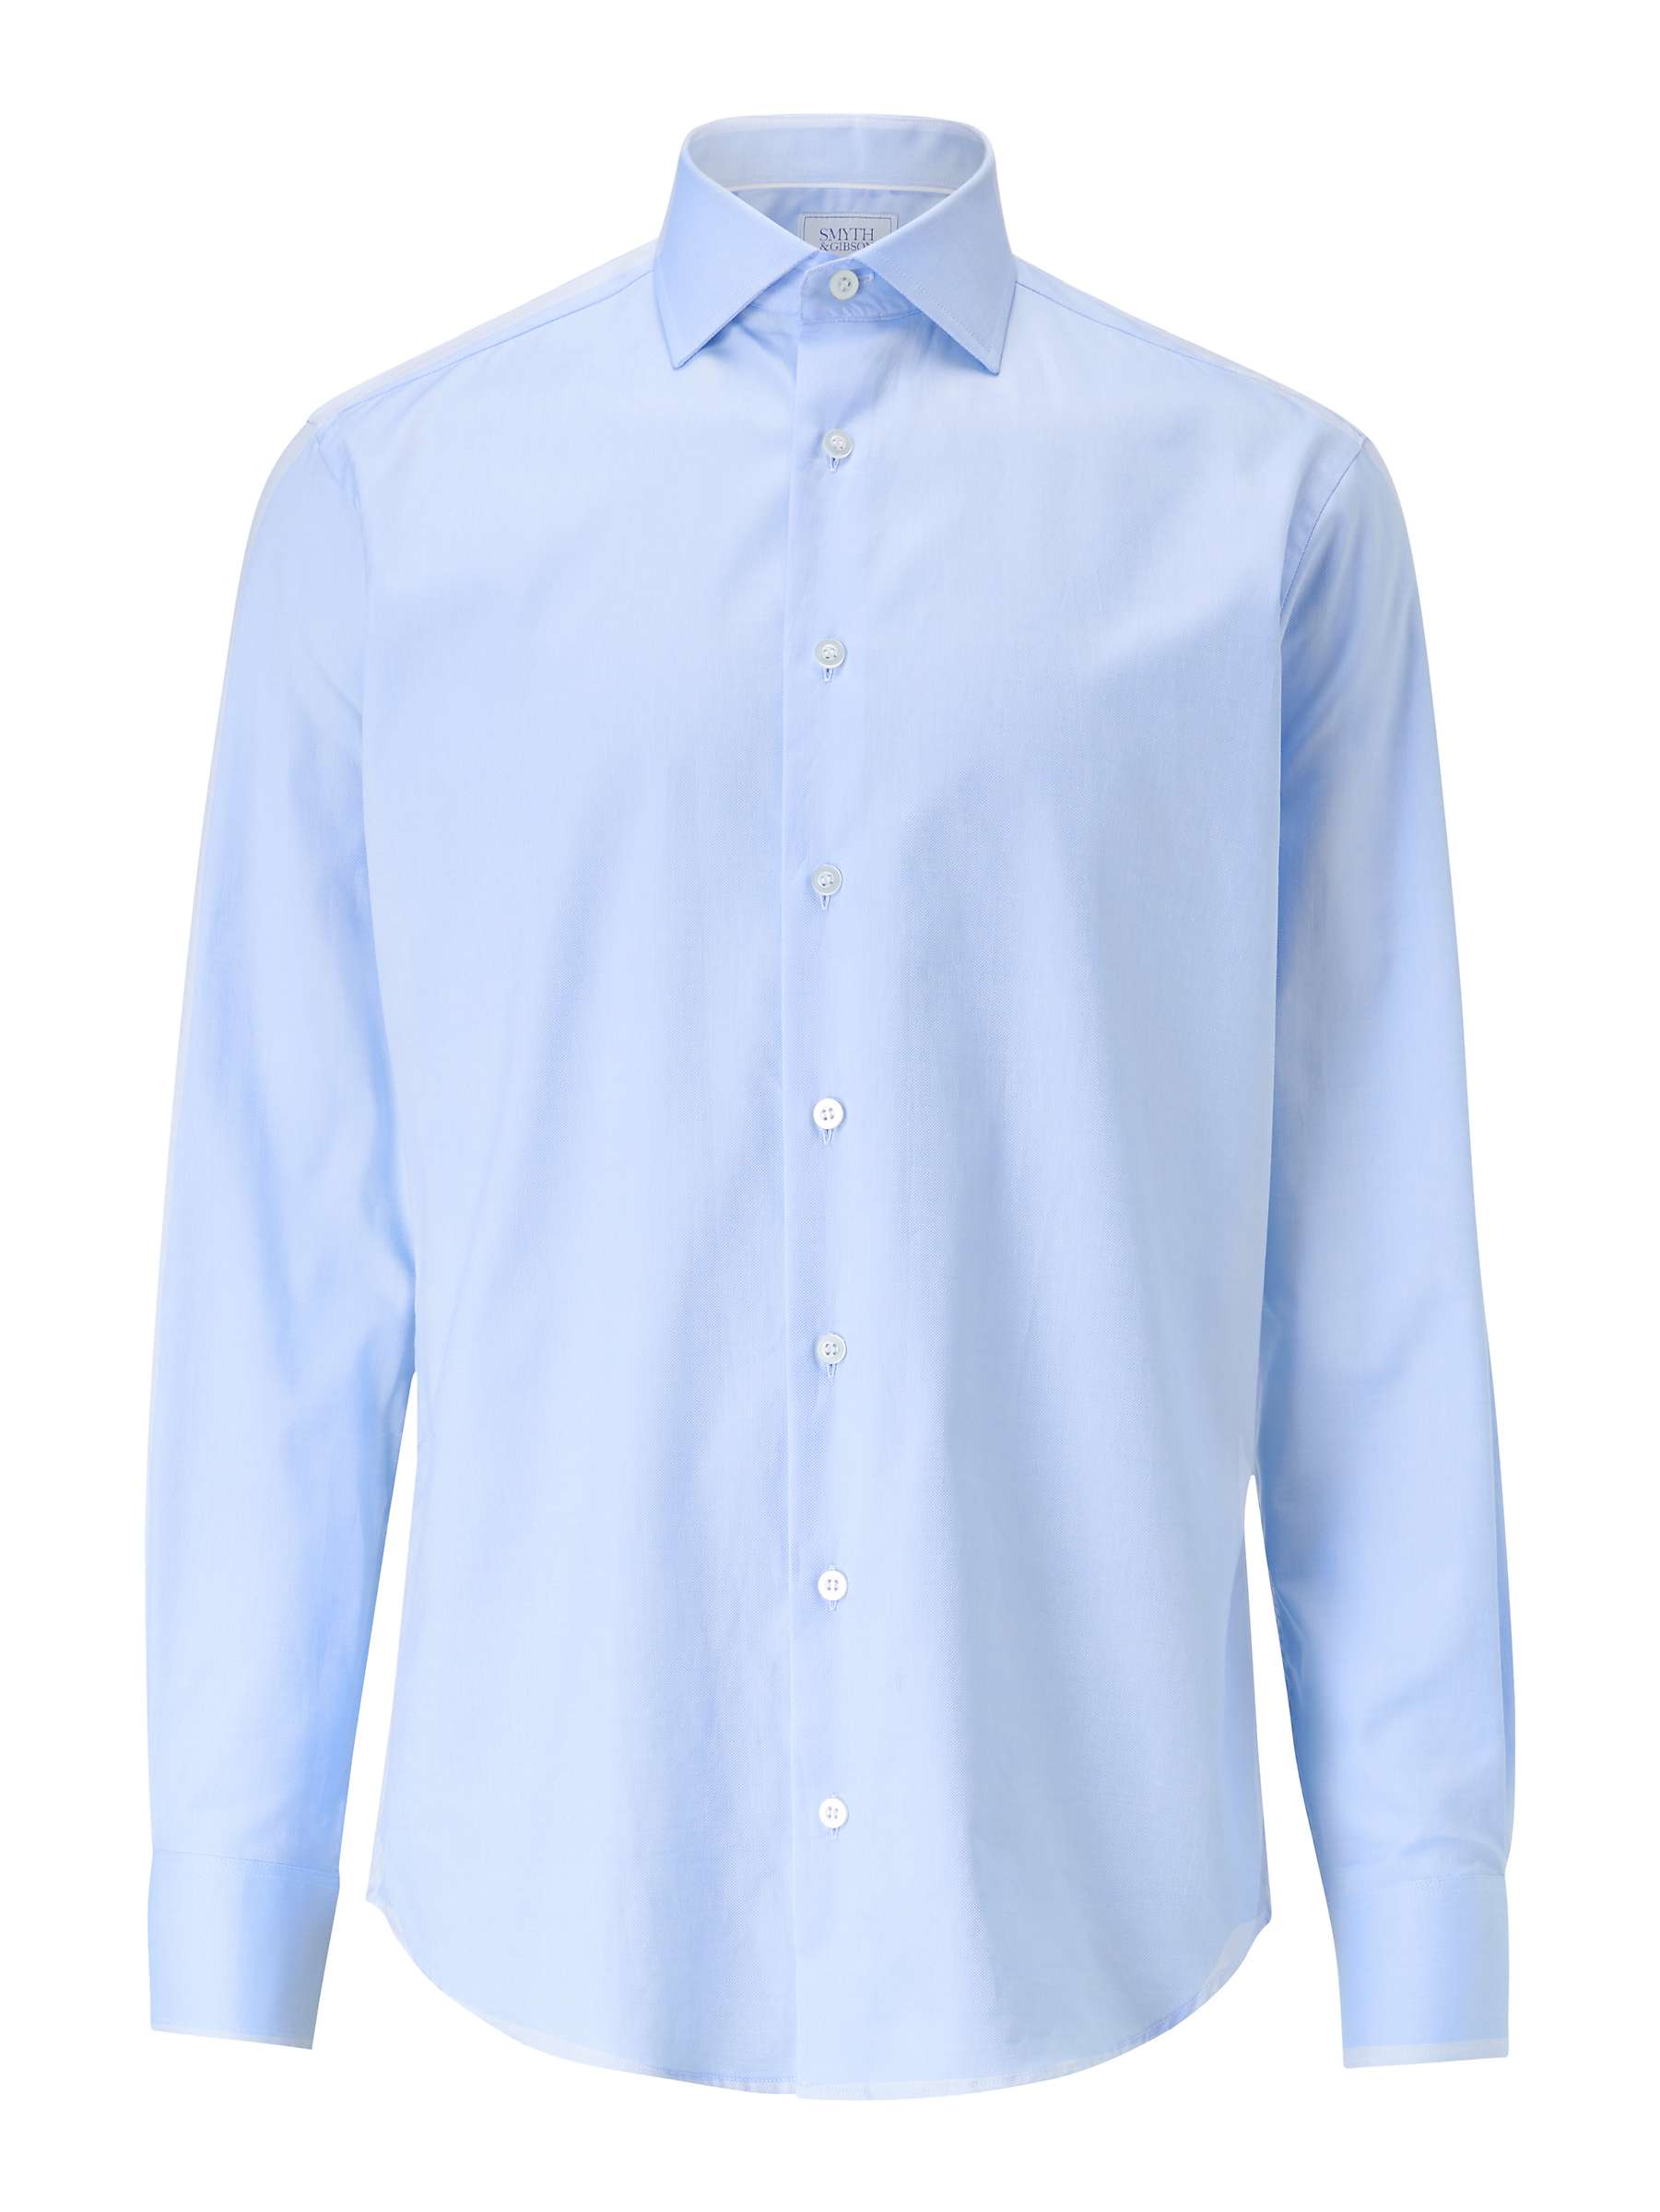 Buy Smyth & Gibson Oxford Pin Dot Contemporary Fit Shirt Online at johnlewis.com